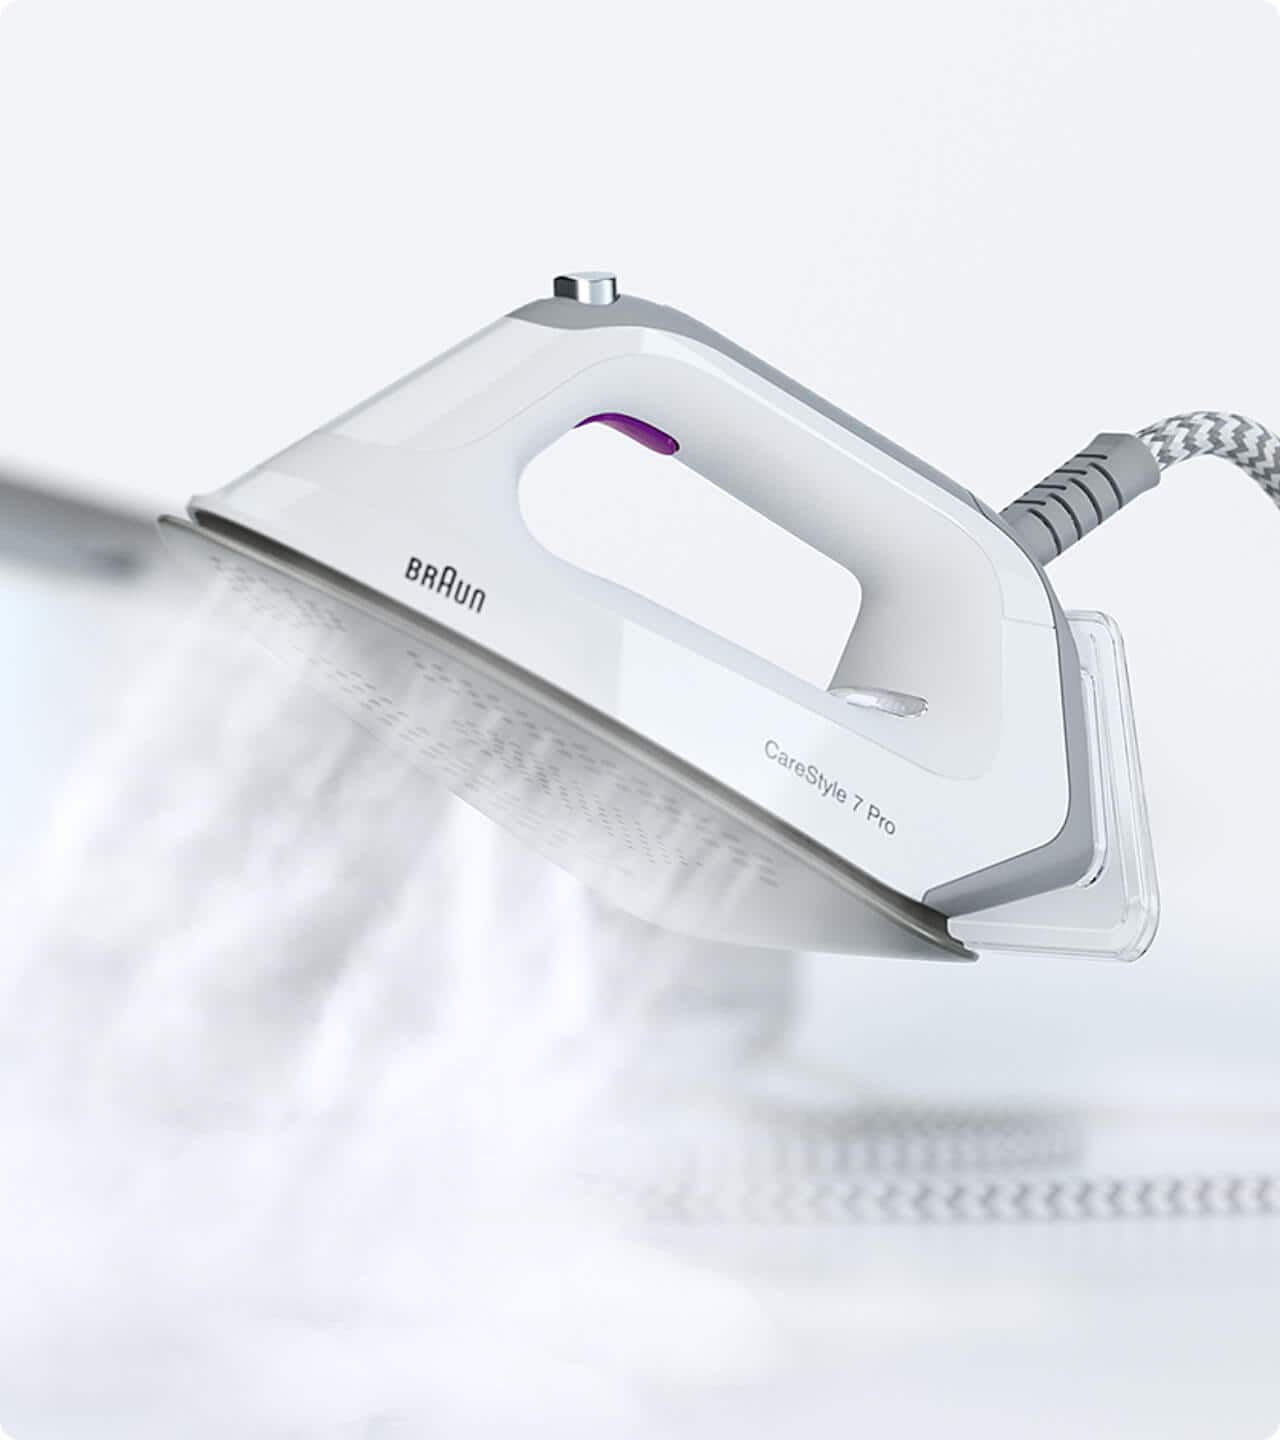 Braun CareStyle 7 with heavy steam output